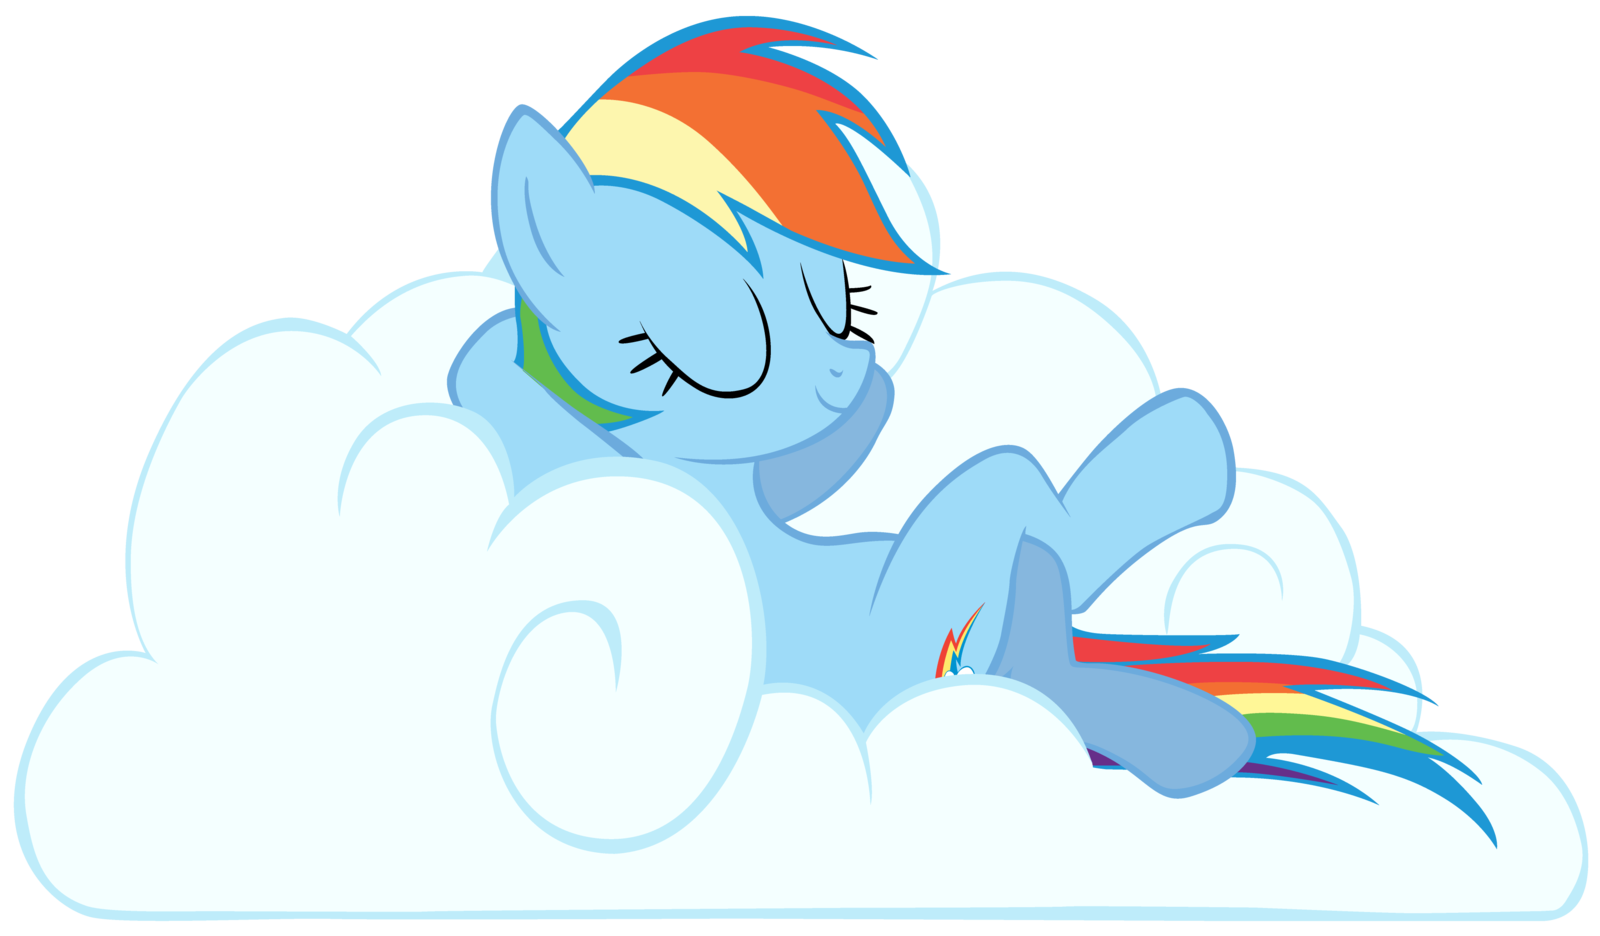 RD Vector: Resting On A Cloud.